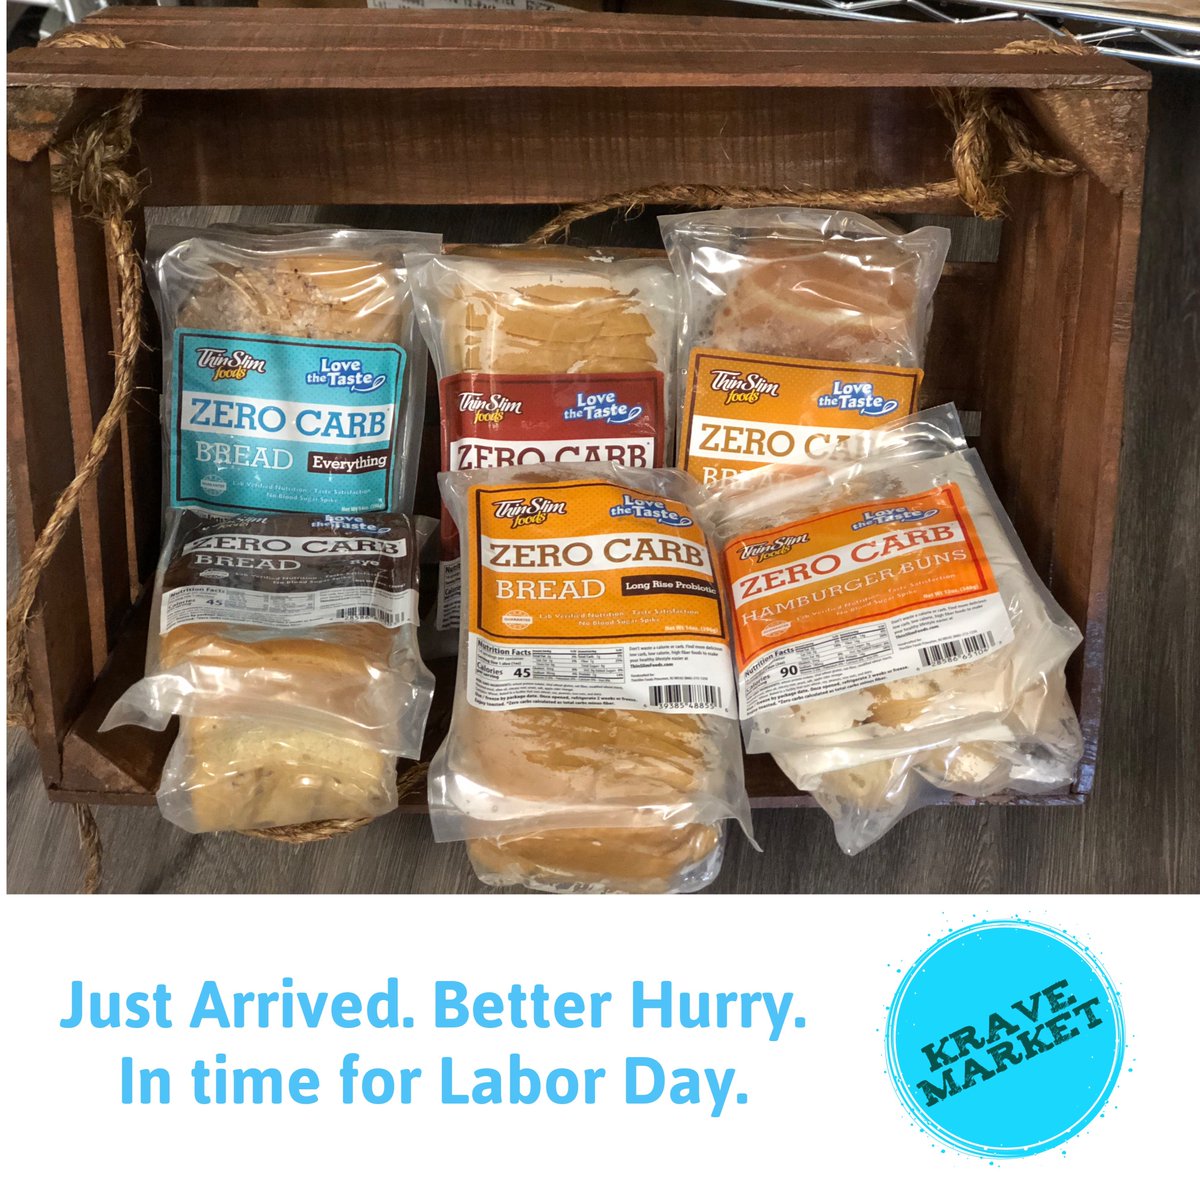 Bread has arrived. Get it before it runs out. #KraveMarket #RGVFood #ZeroCarbBread #keto